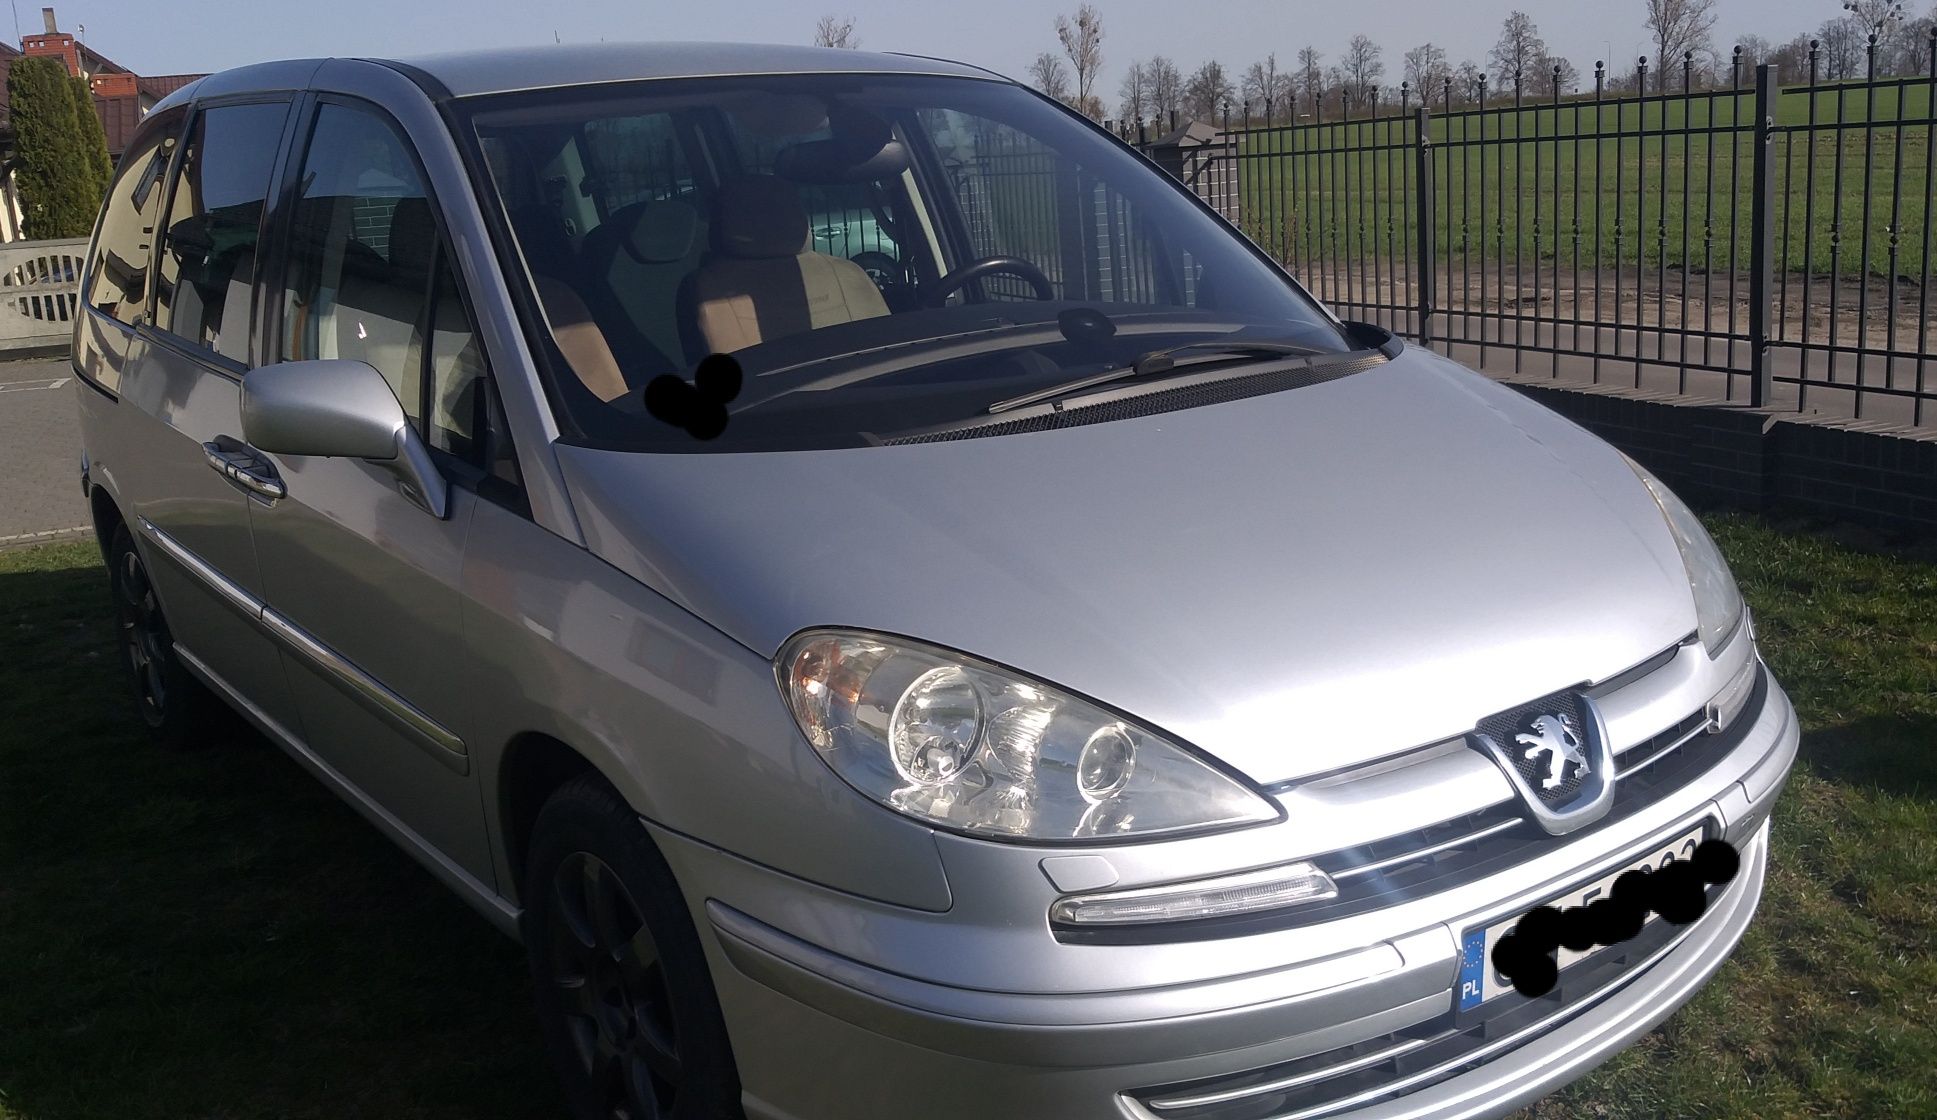 Peugeot 807 DIESEL 2.0 HDI 7 OSOBOWY